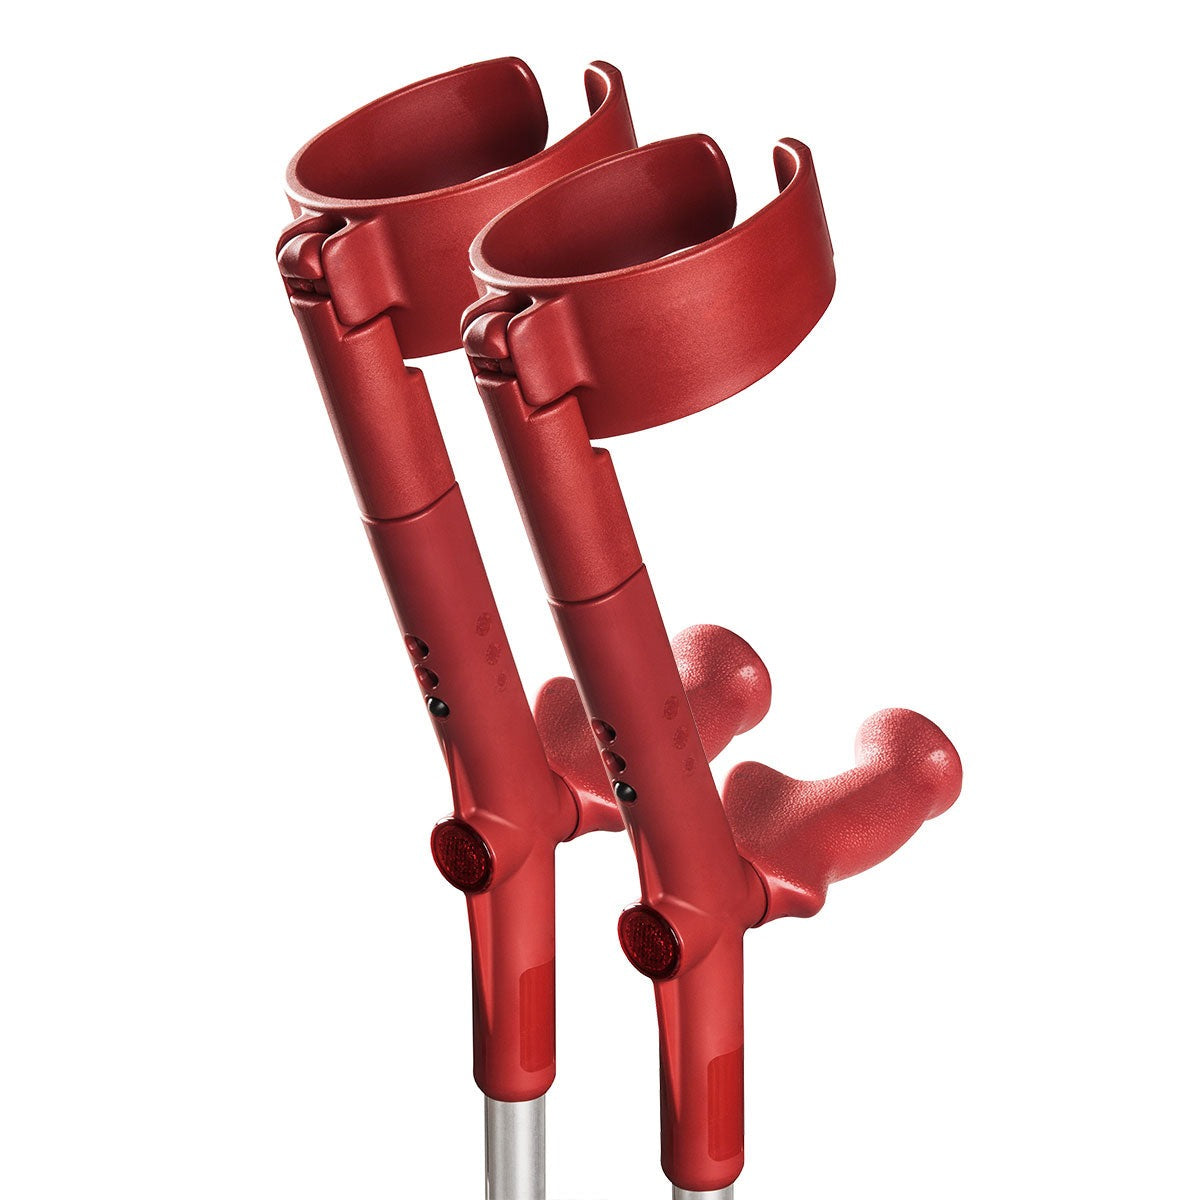 Forearm crutches - Red Medgear Care